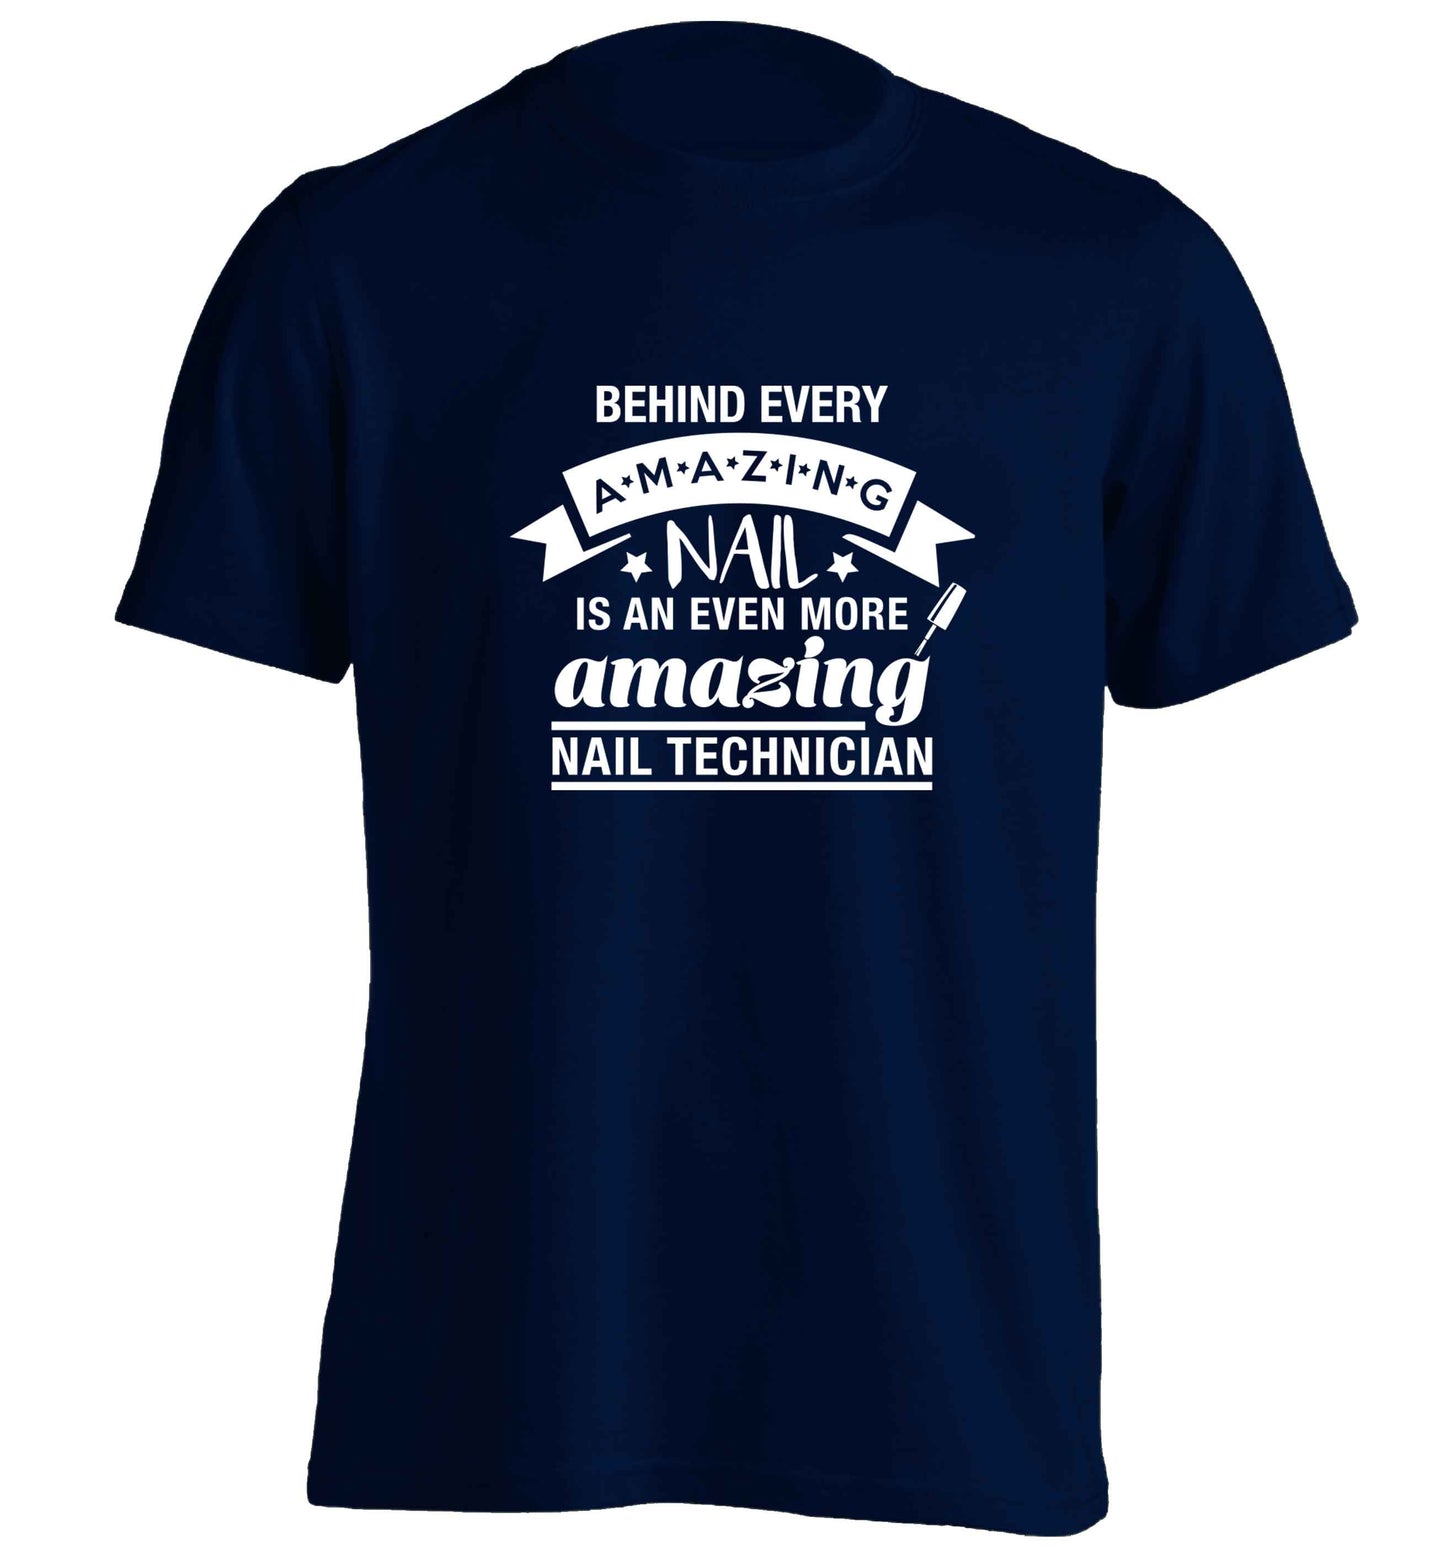 Behind every amazing nail is an even more amazing nail technician adults unisex navy Tshirt 2XL